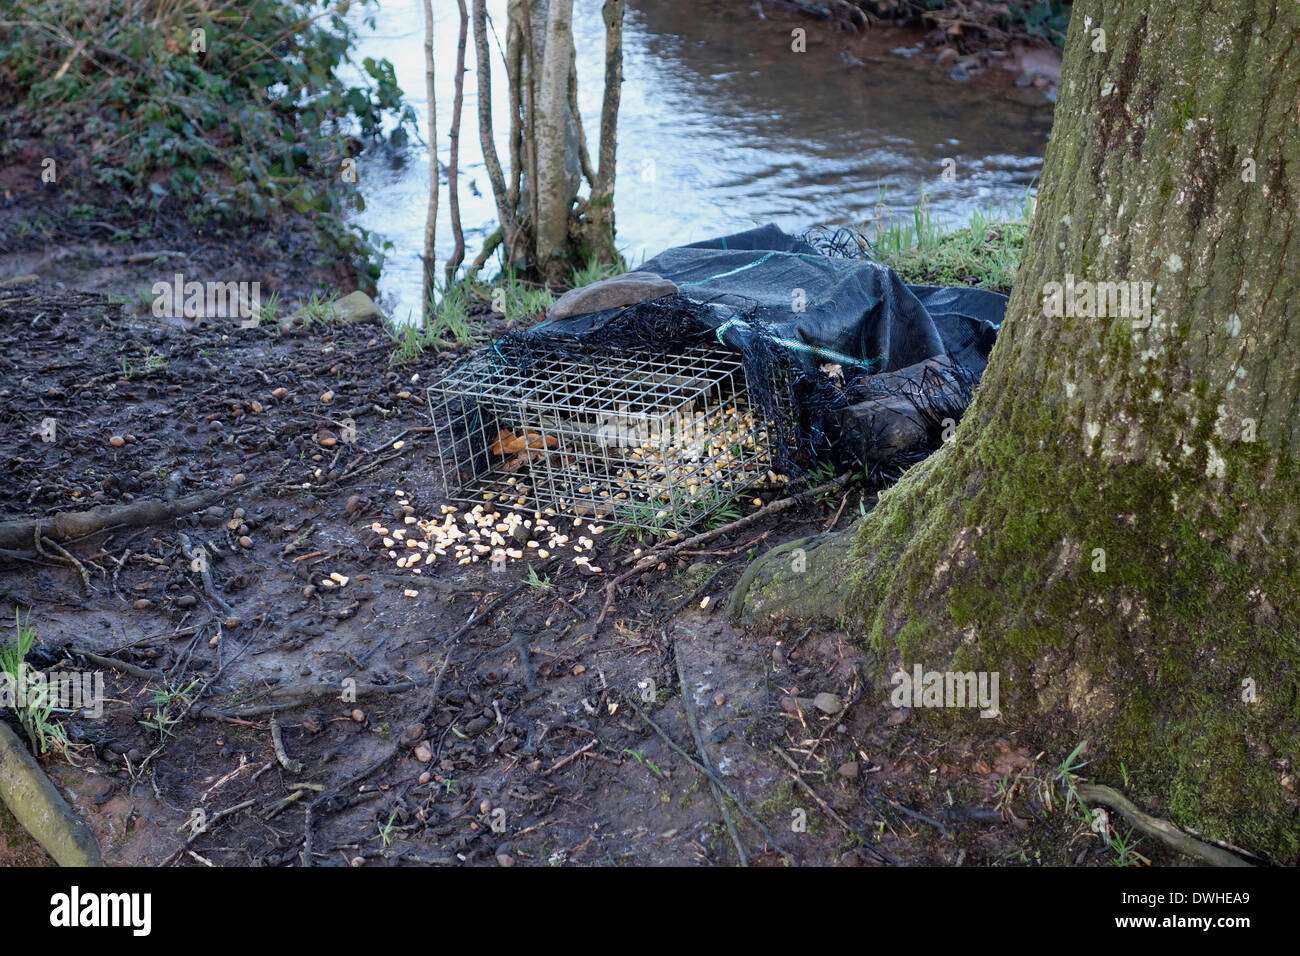 Traps baited with Maize - Corn - Zea mays seed to attract grey squirrels. Stock Photo